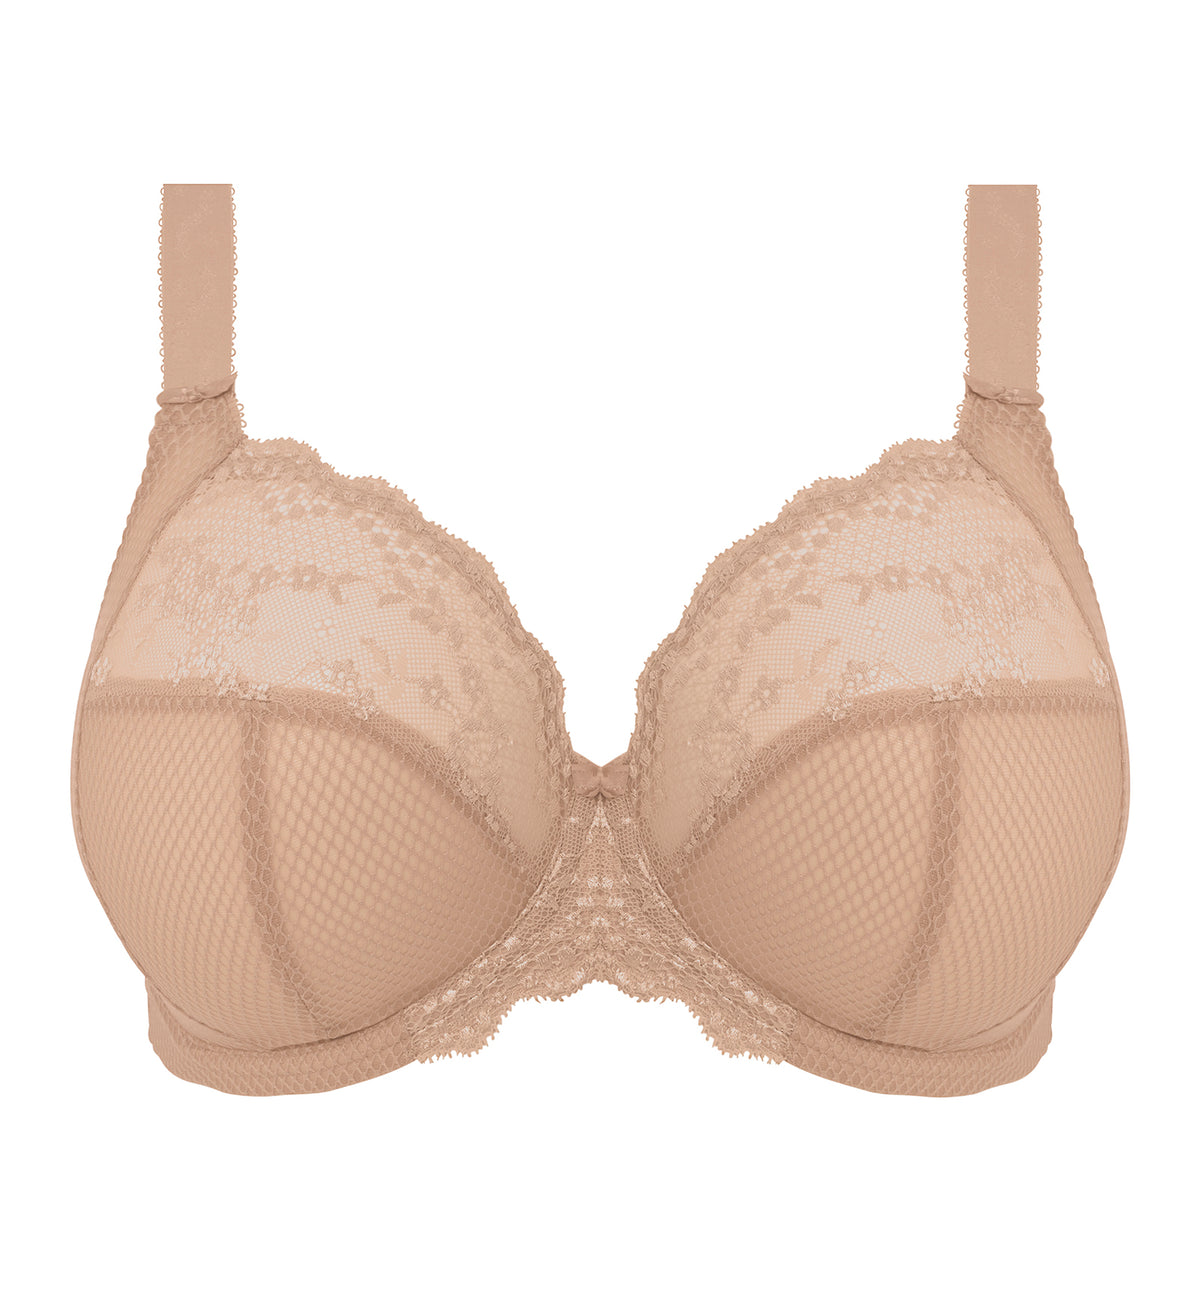 Elomi Charley Banded Stretch Lace Plunge Underwire Bra (4382),32GG,Fawn - Fawn,32GG